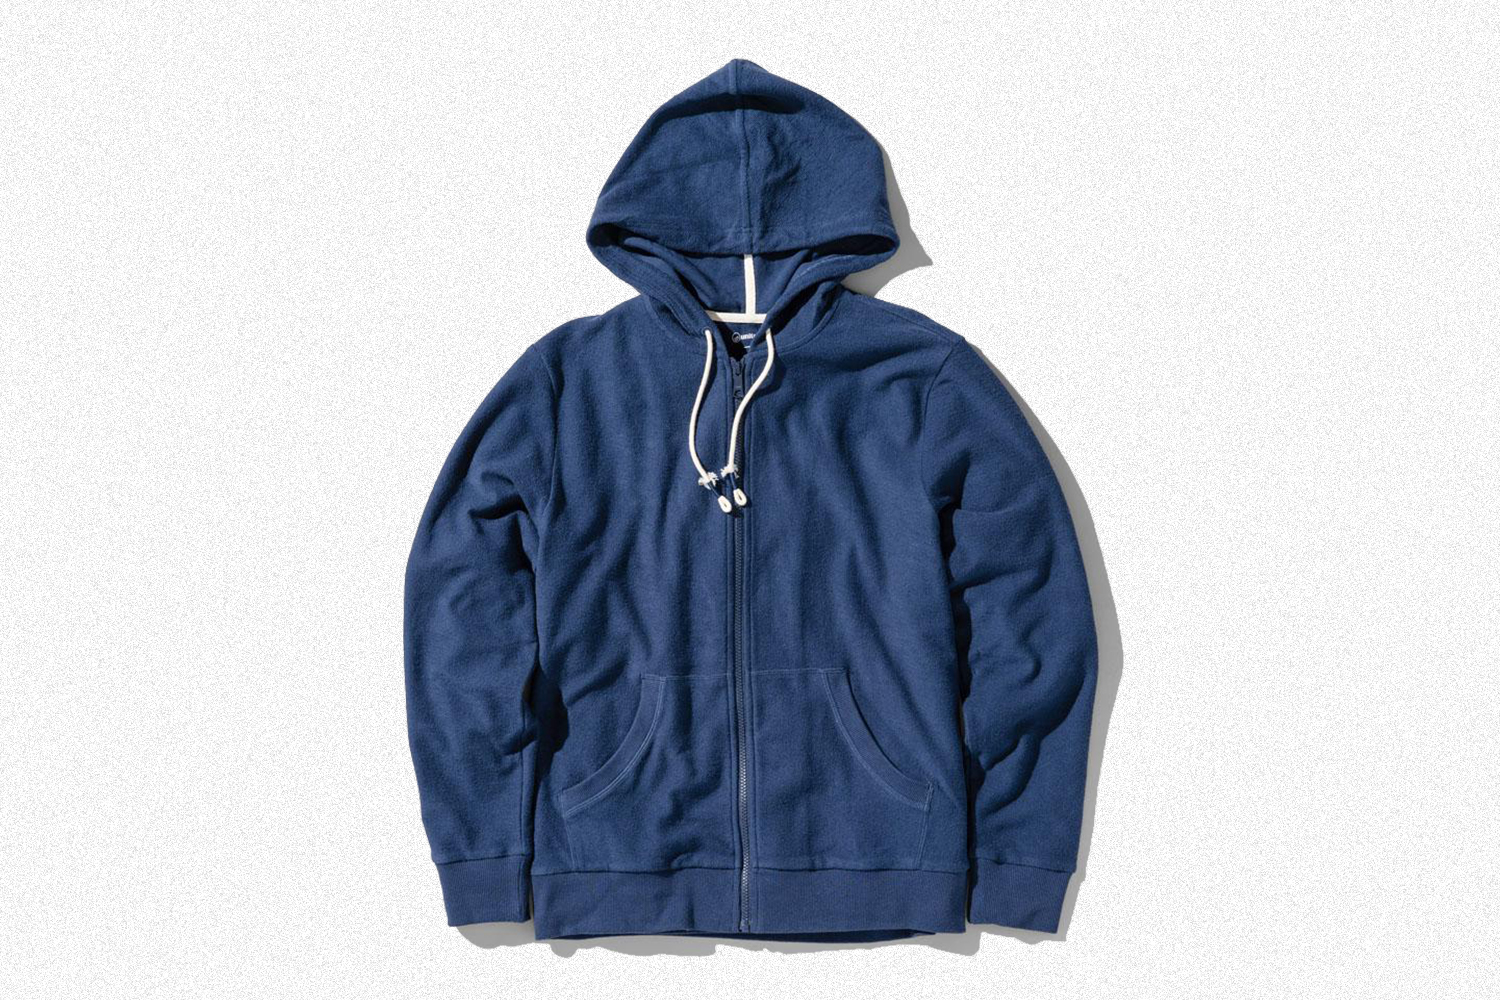 The Organic Terry Zip-Up Hoodie from United by Blue in navy